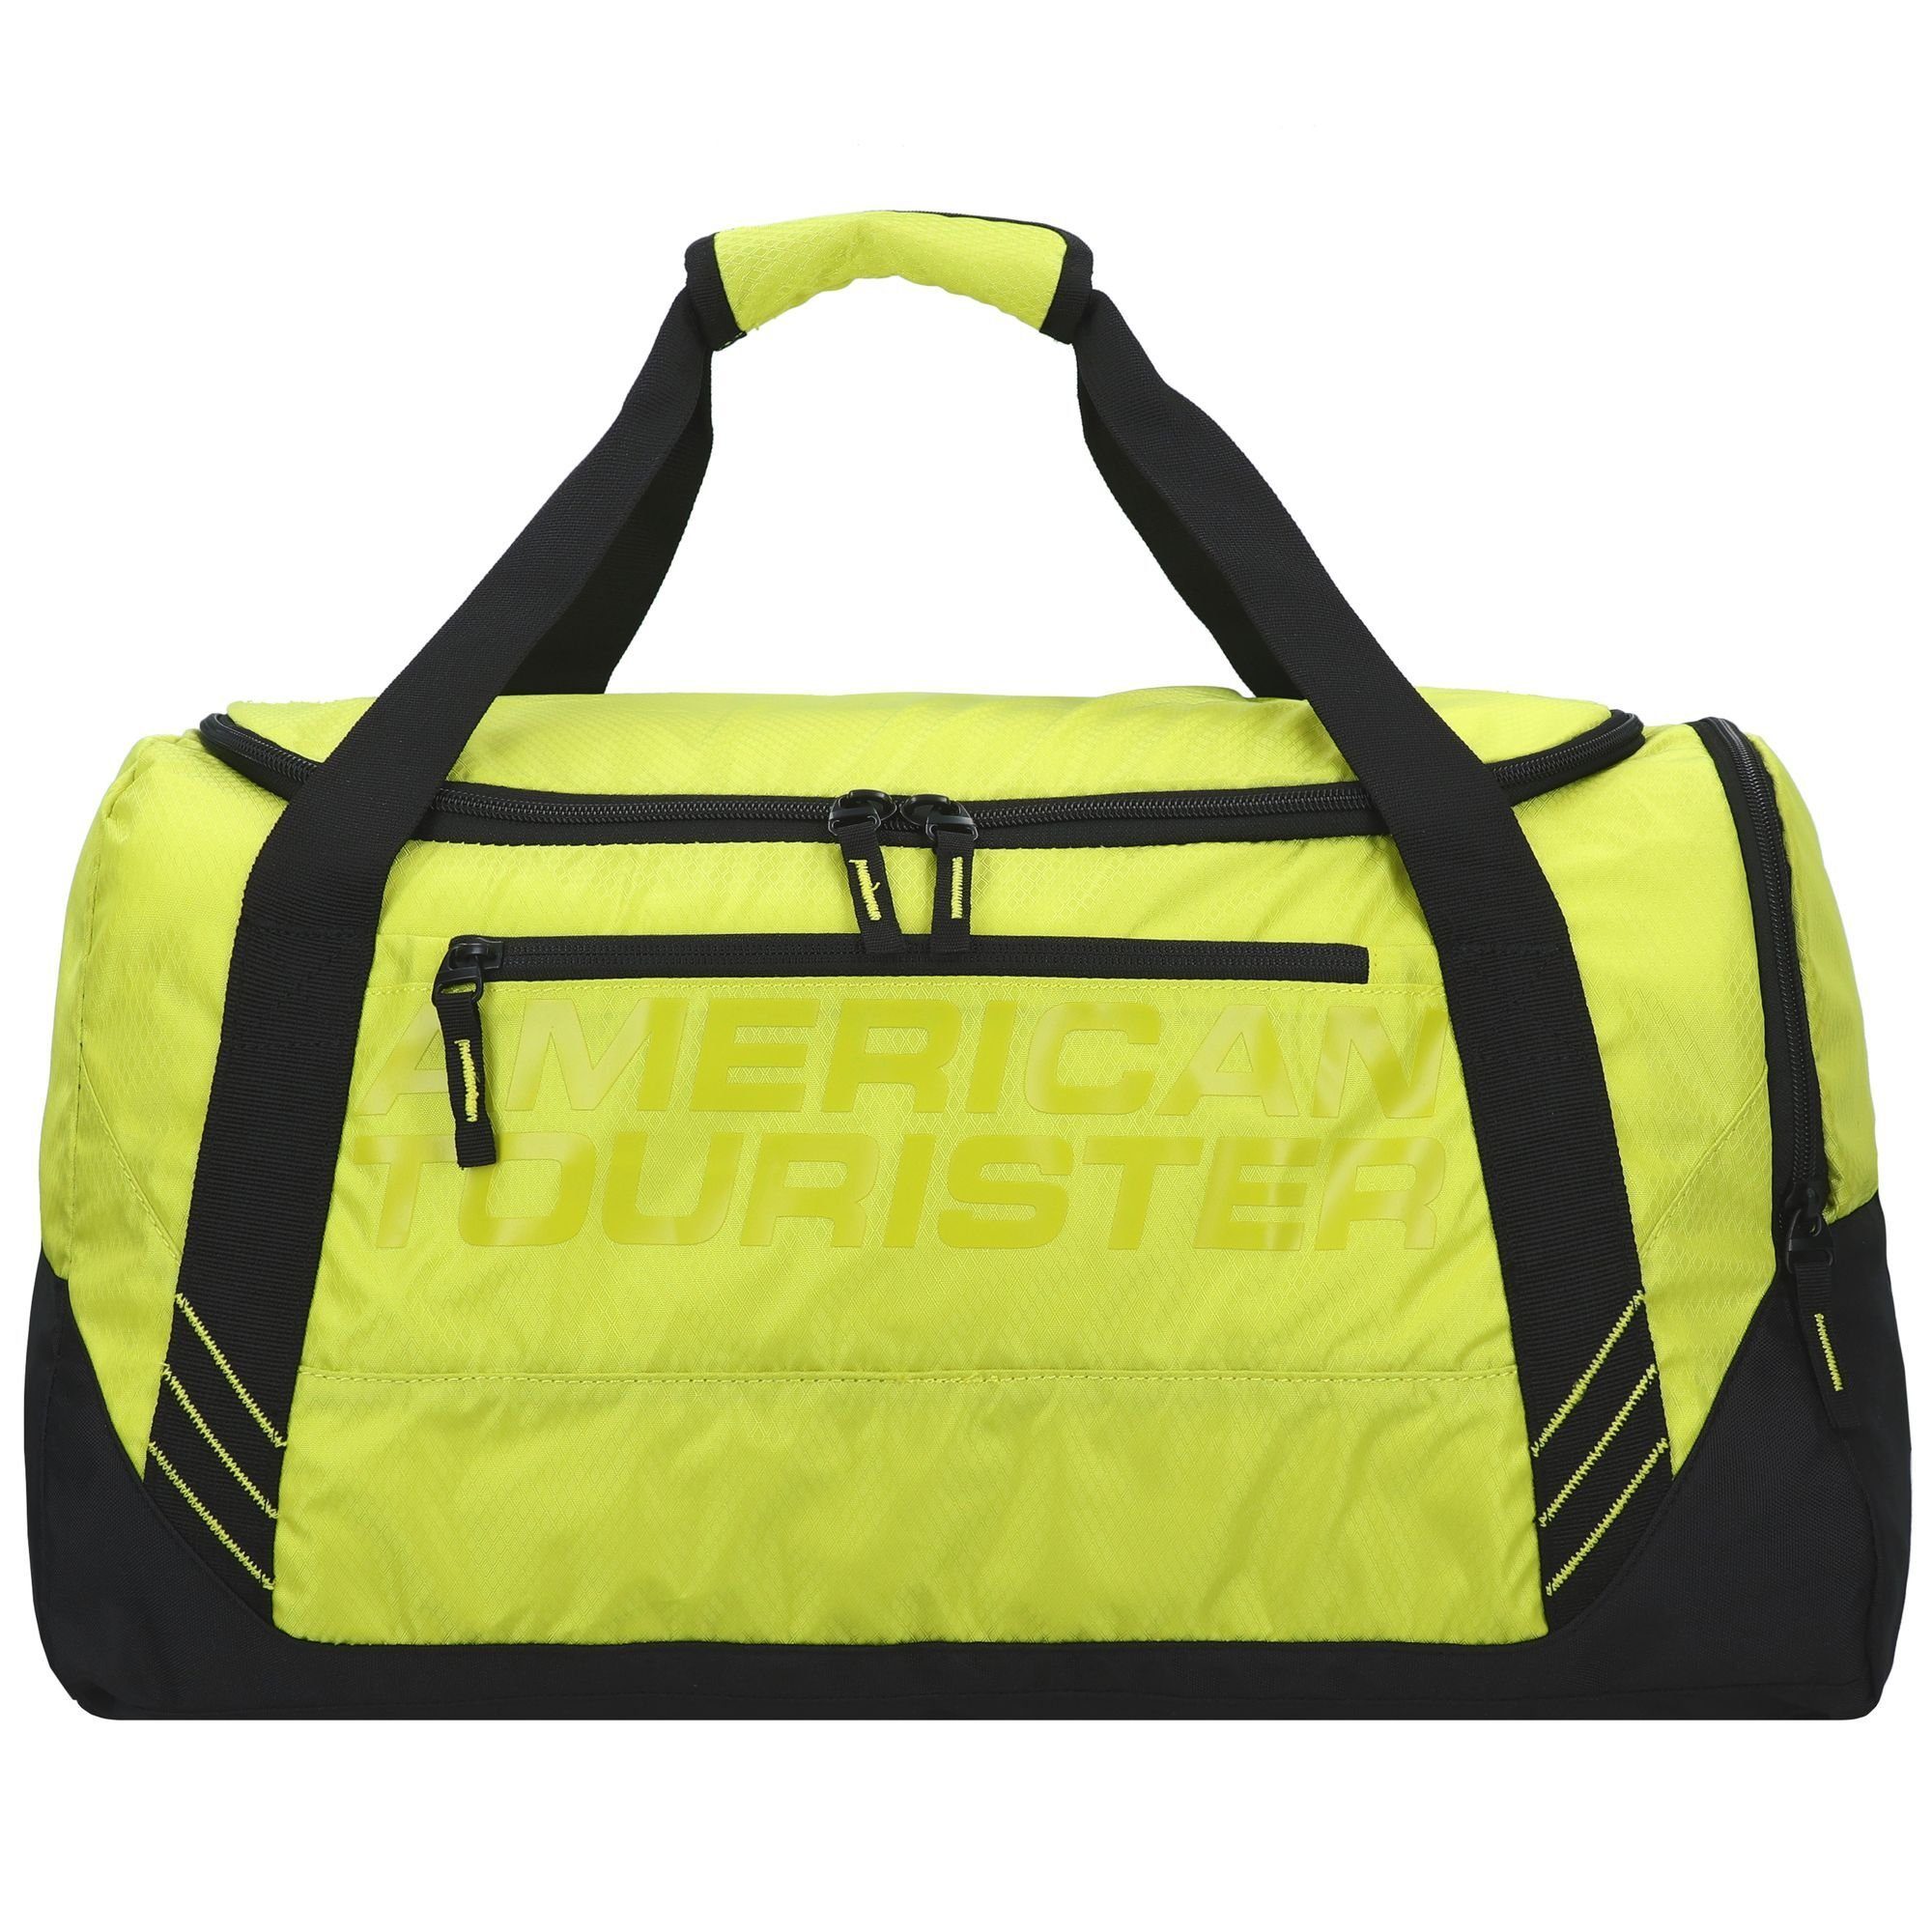 American Tourister® Sporttasche Urban Groove, Polyester black/lime green